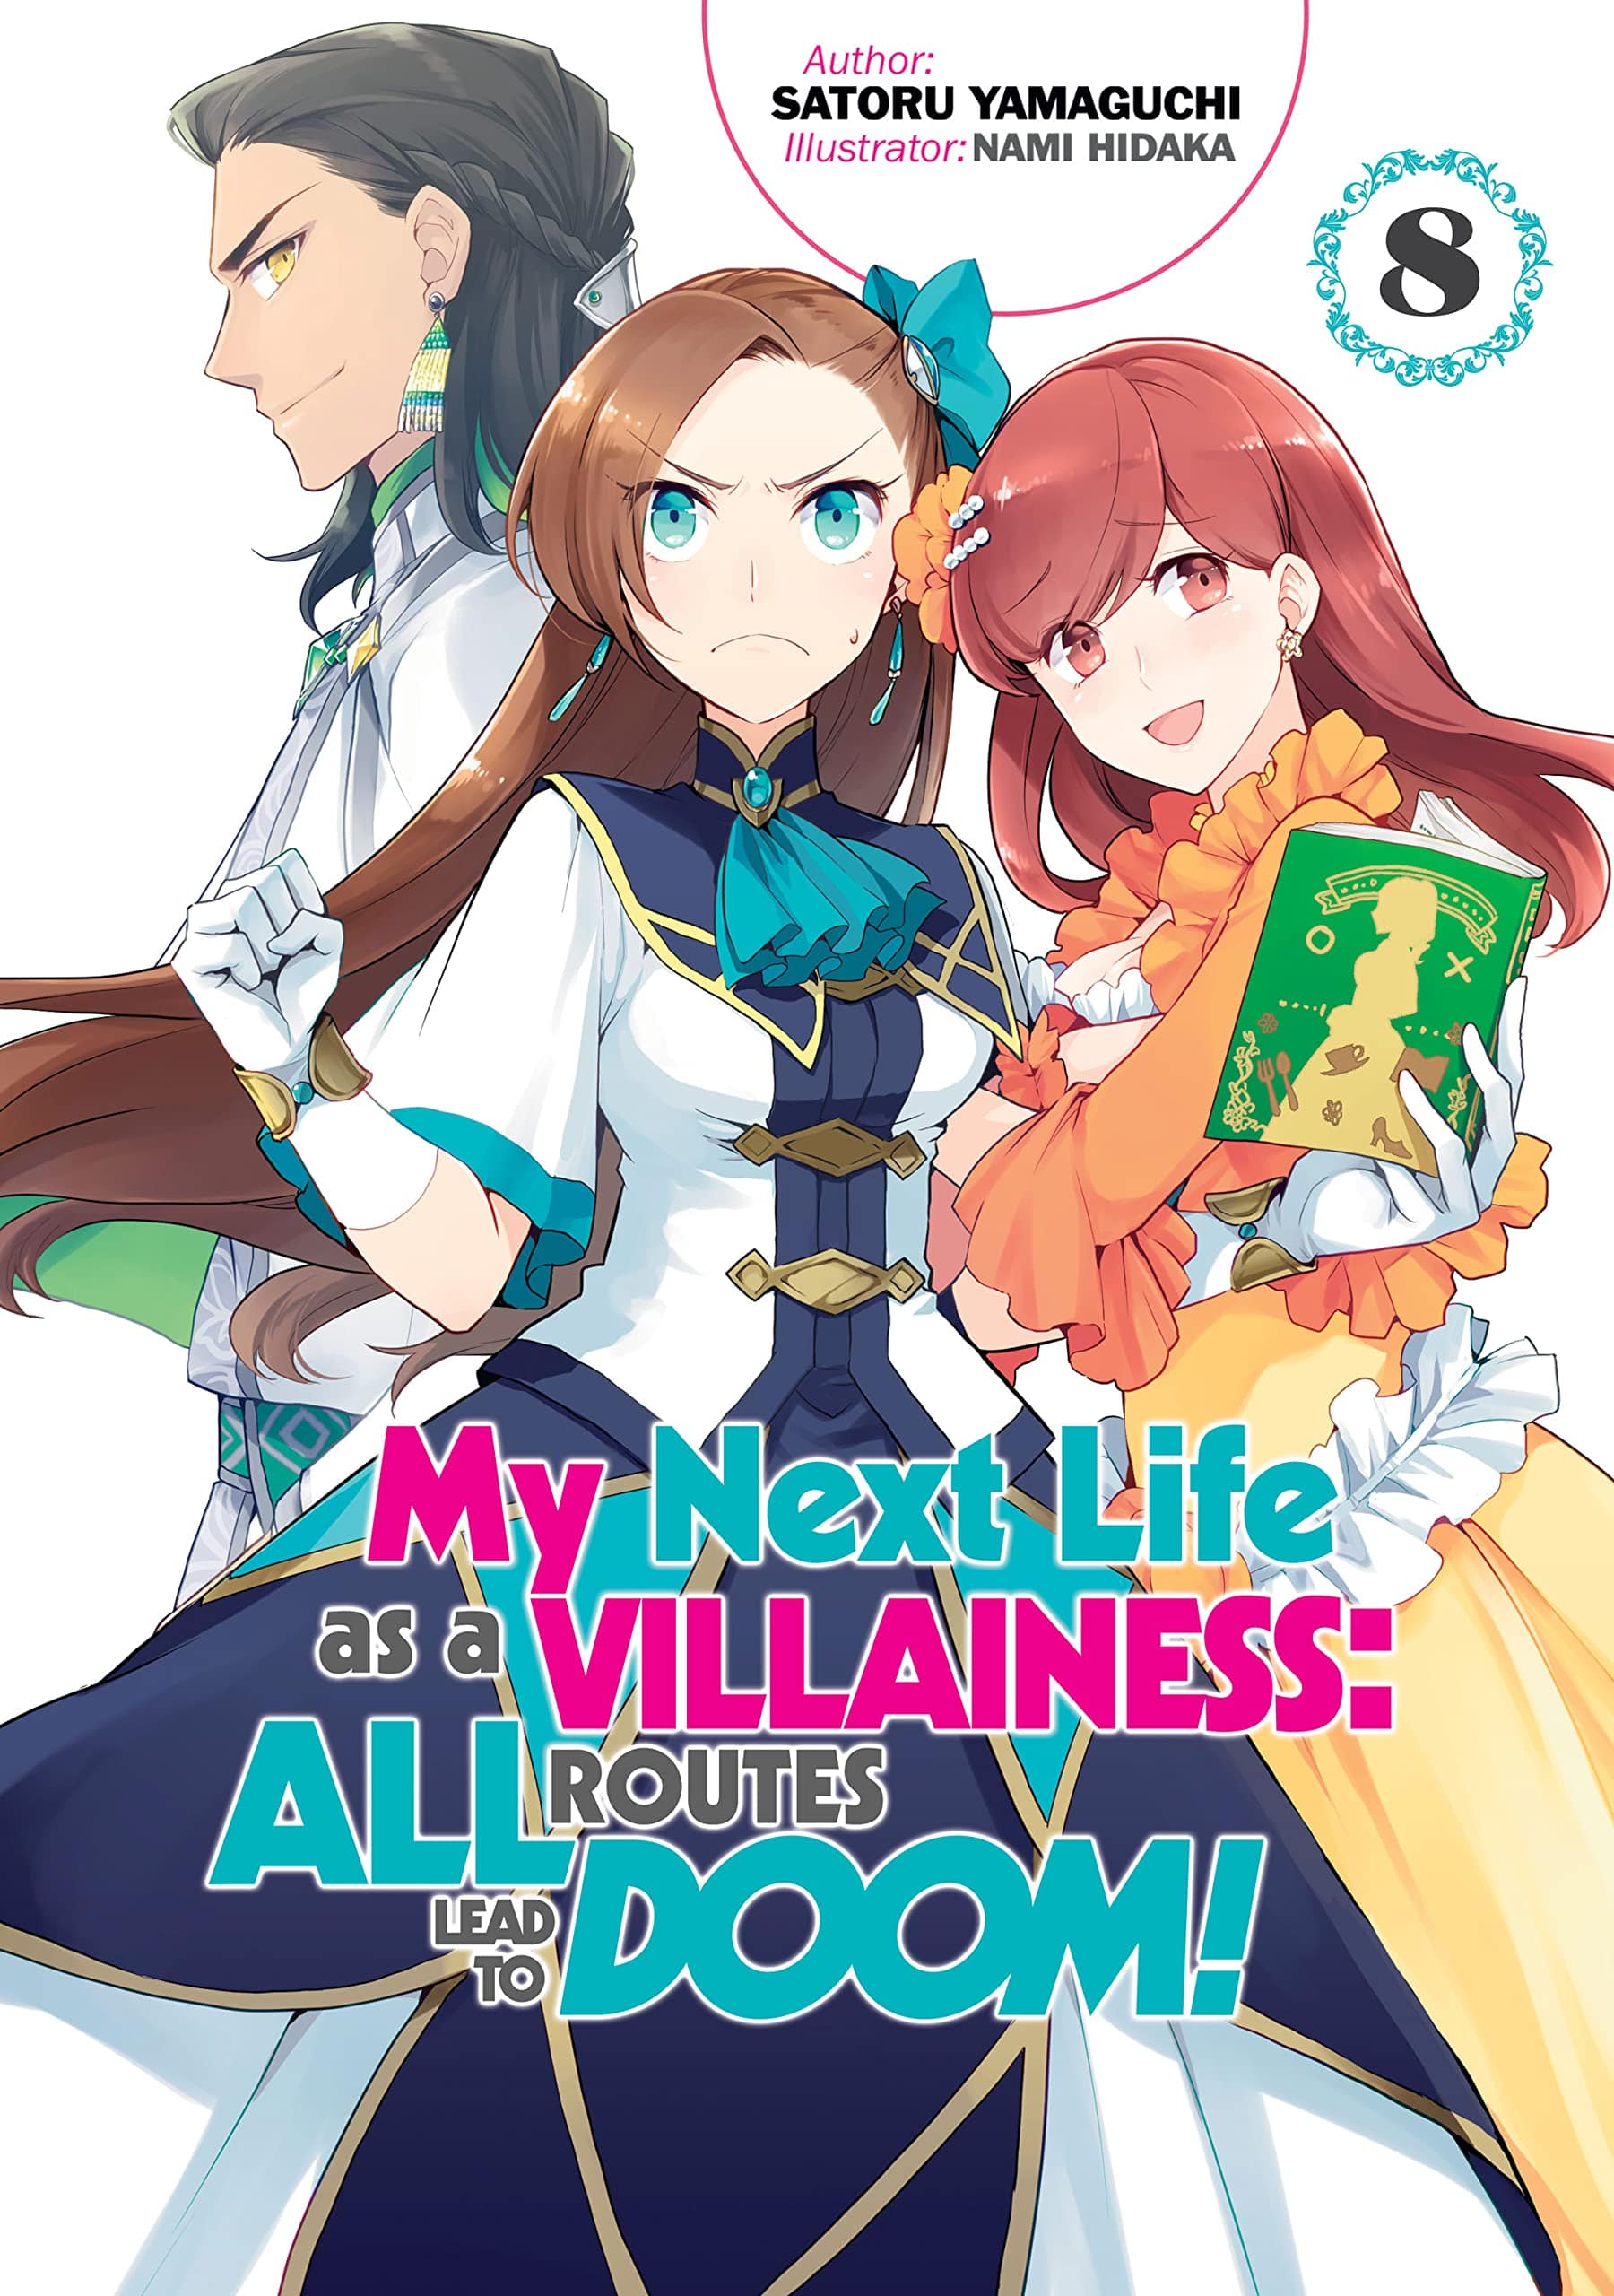 My Next Life as a Villainess: All Routes Lead to Doom! Vol. 8 - Third Eye